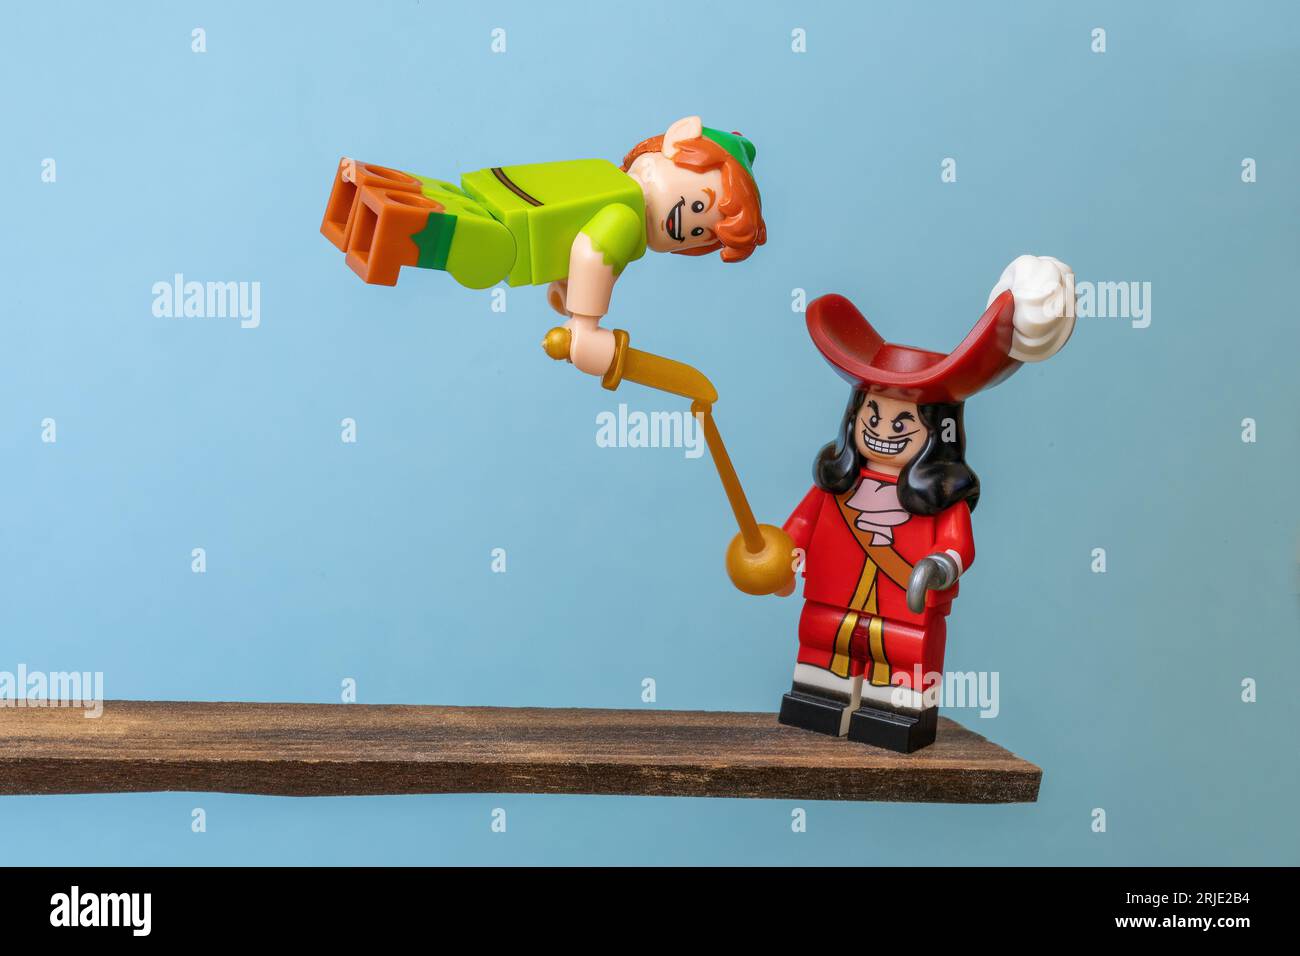 A closeup of two Lego figures, a pirate and Peter Pan, in a fight